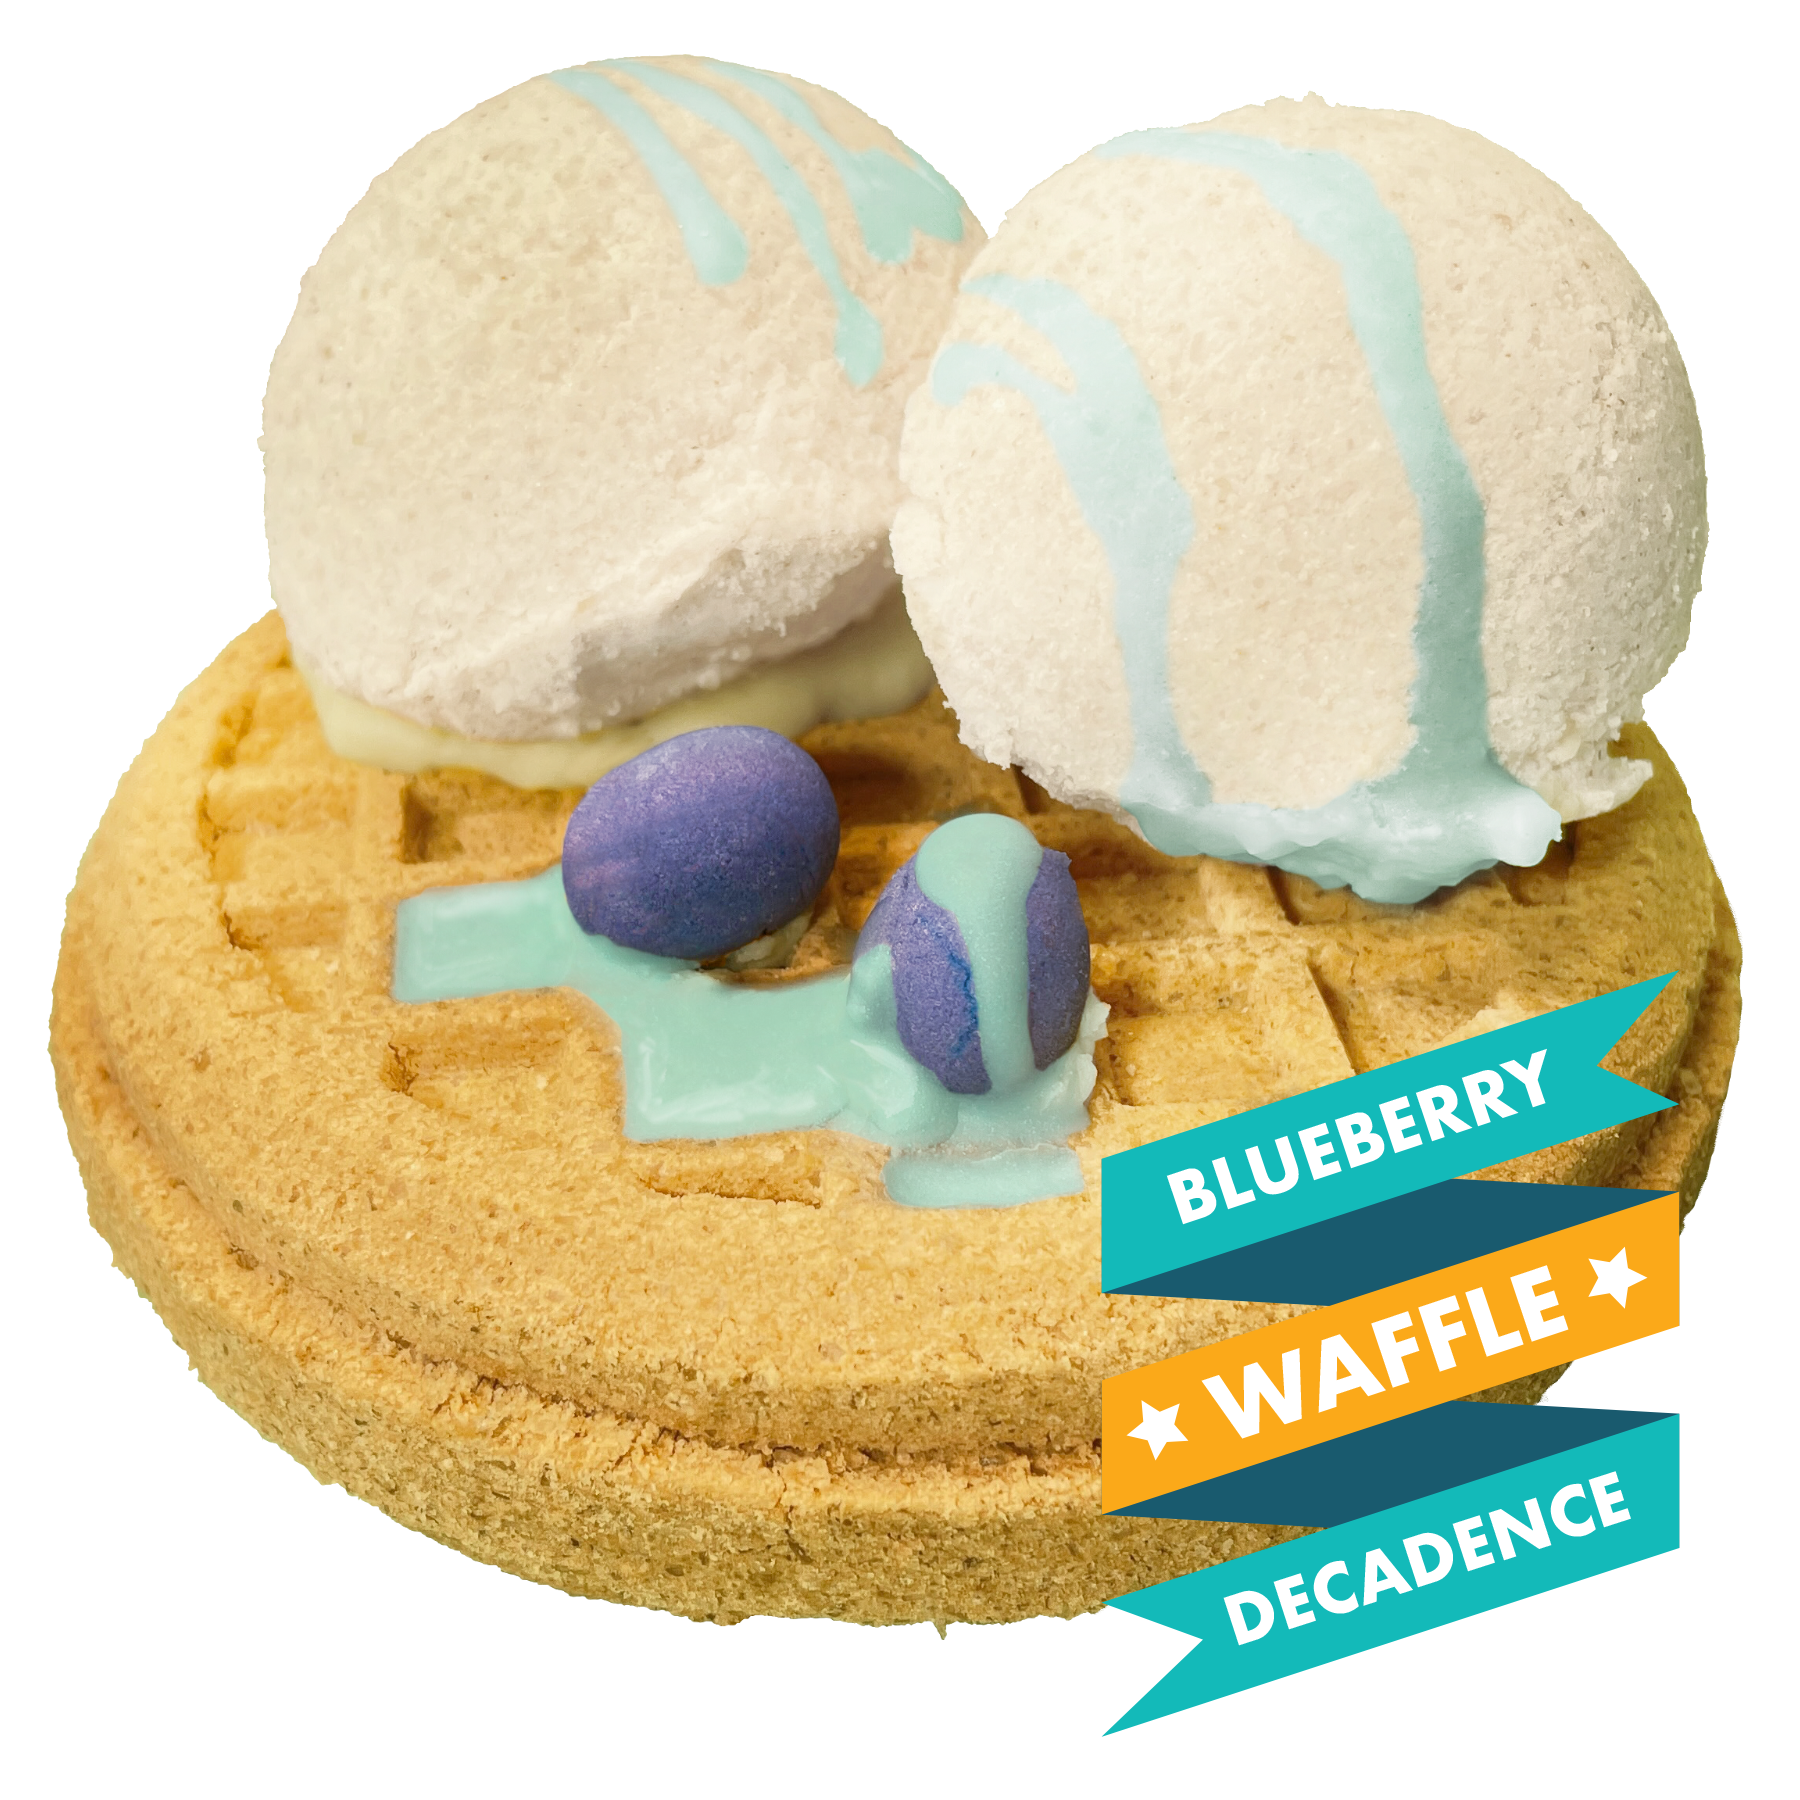 Bath Bombs, Natural Products, Organic Gifts, Blue Berry Waffle Bath Bombs, Gifts for her, Organic Products, Best Bath Bombs, Yumm Products, Lush Products